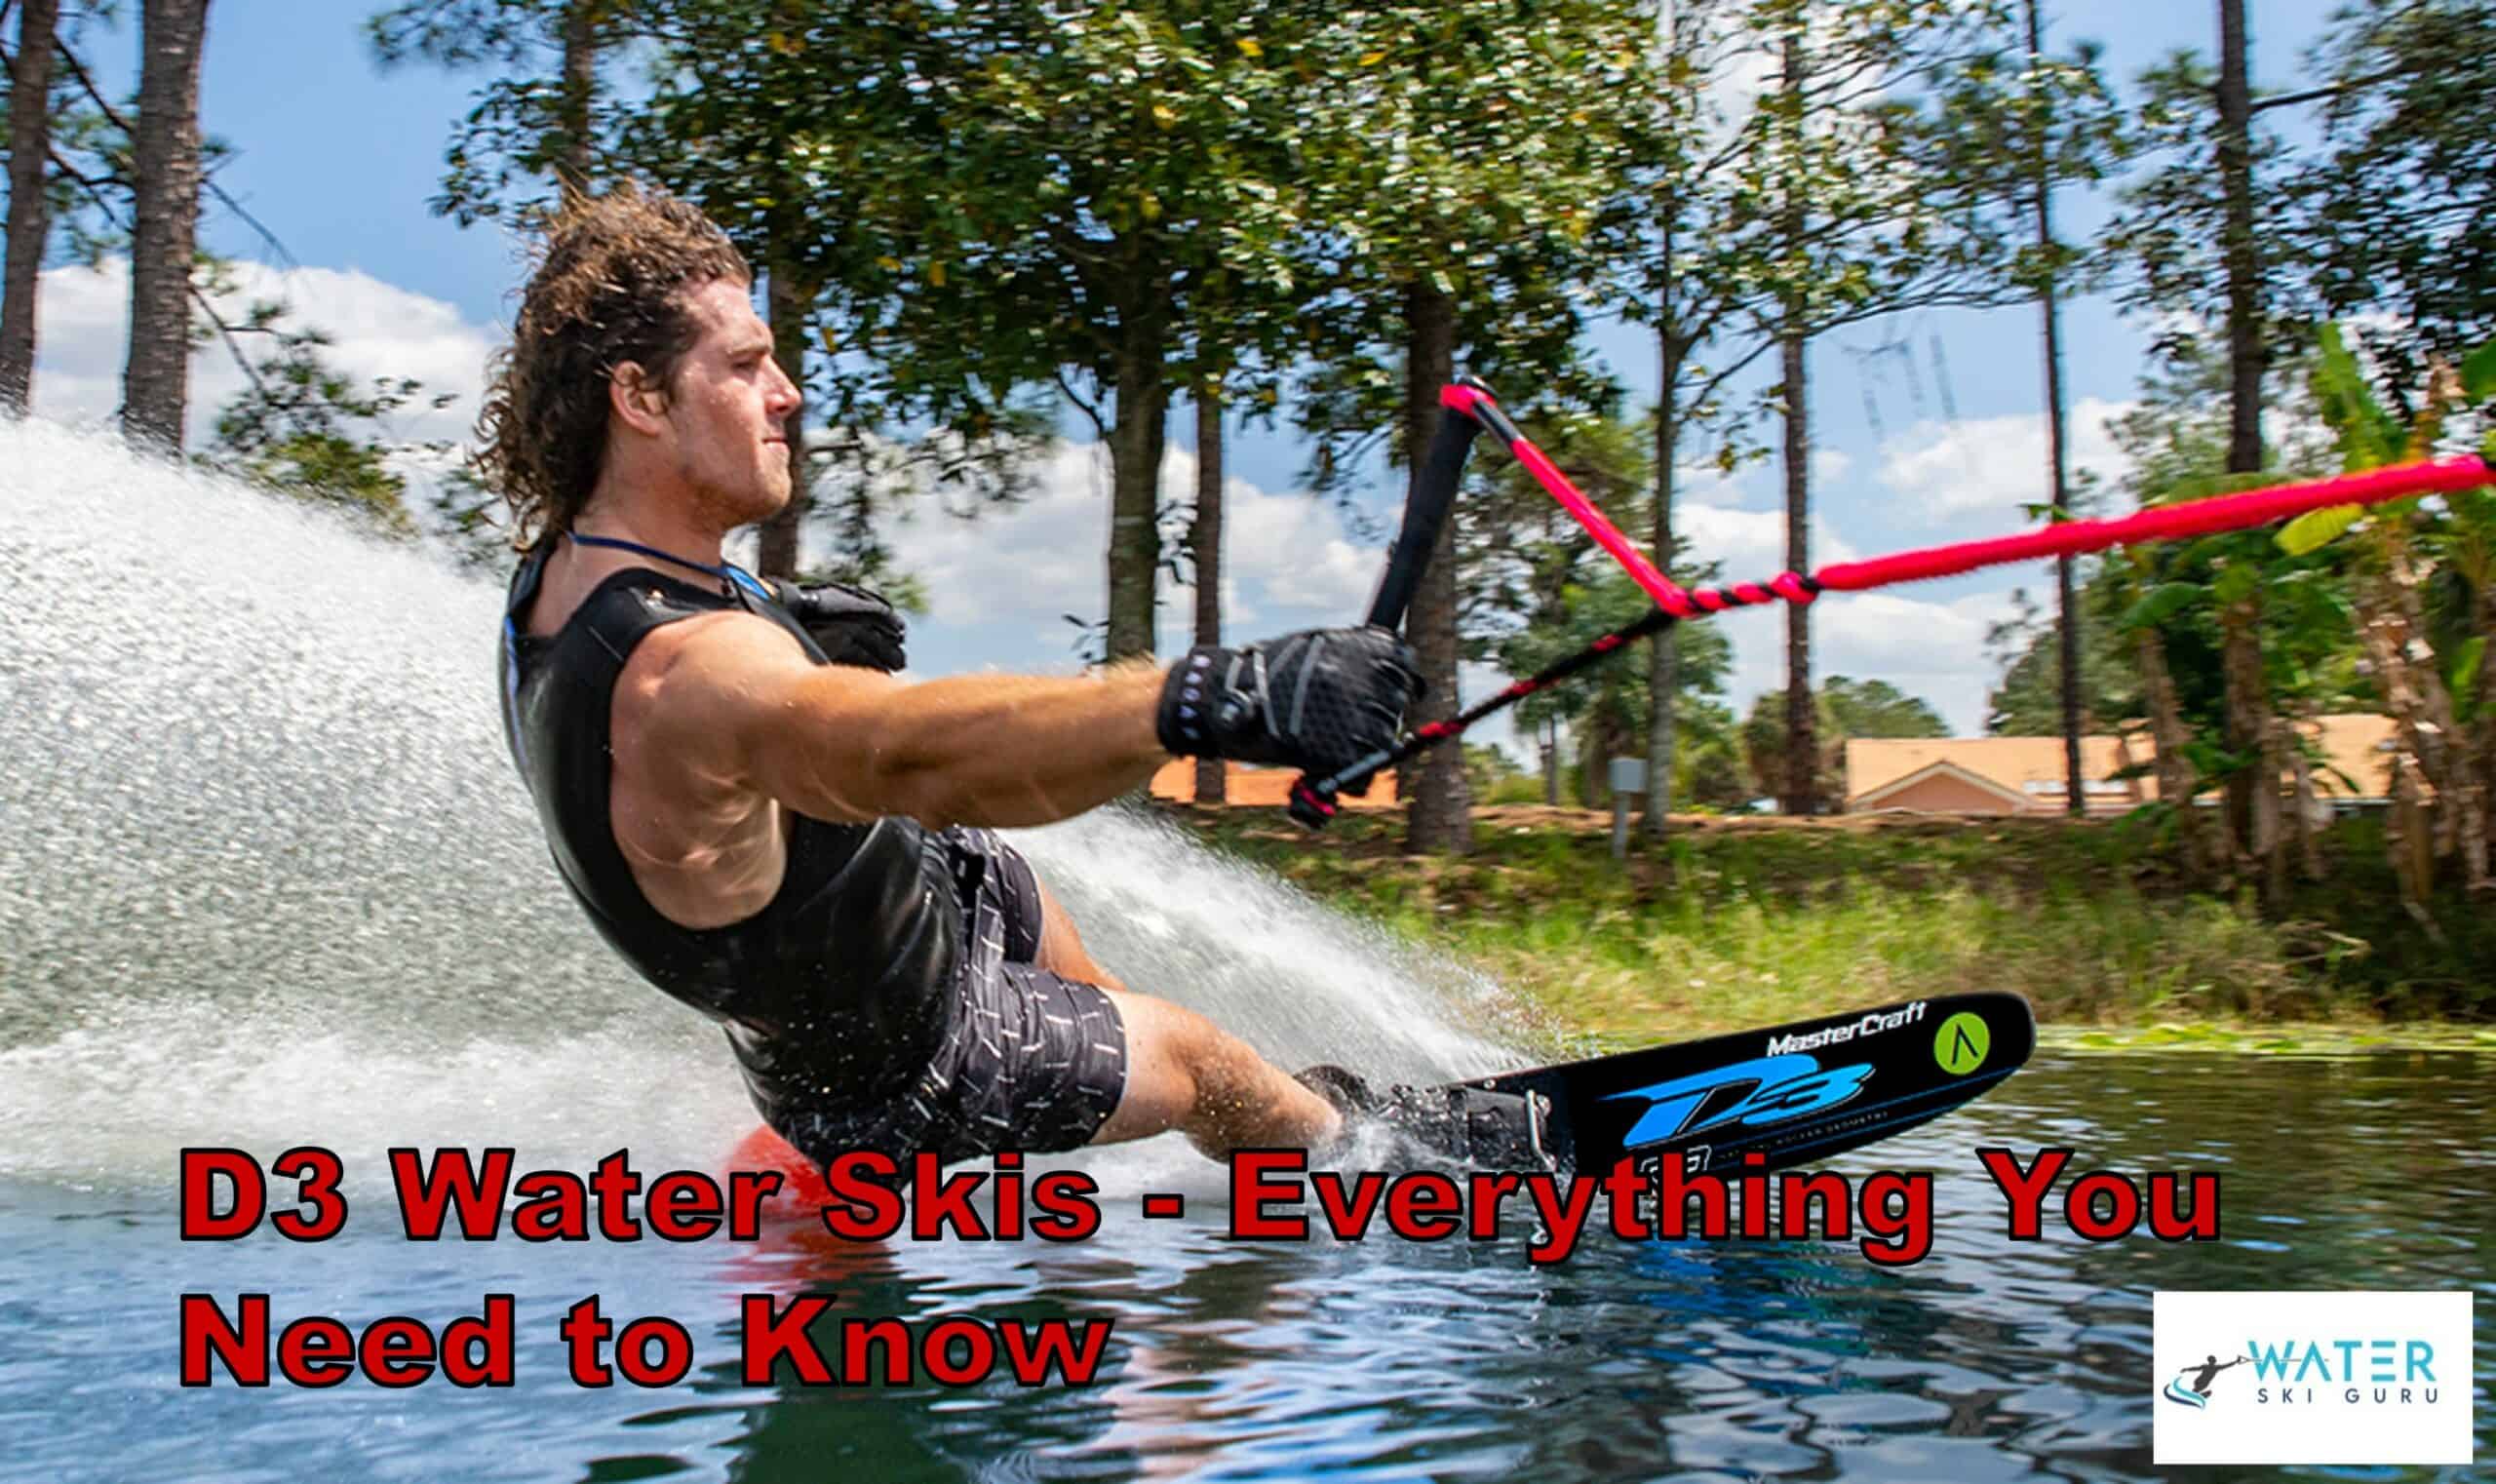 D3 Water Skis - Everything You Need to Know